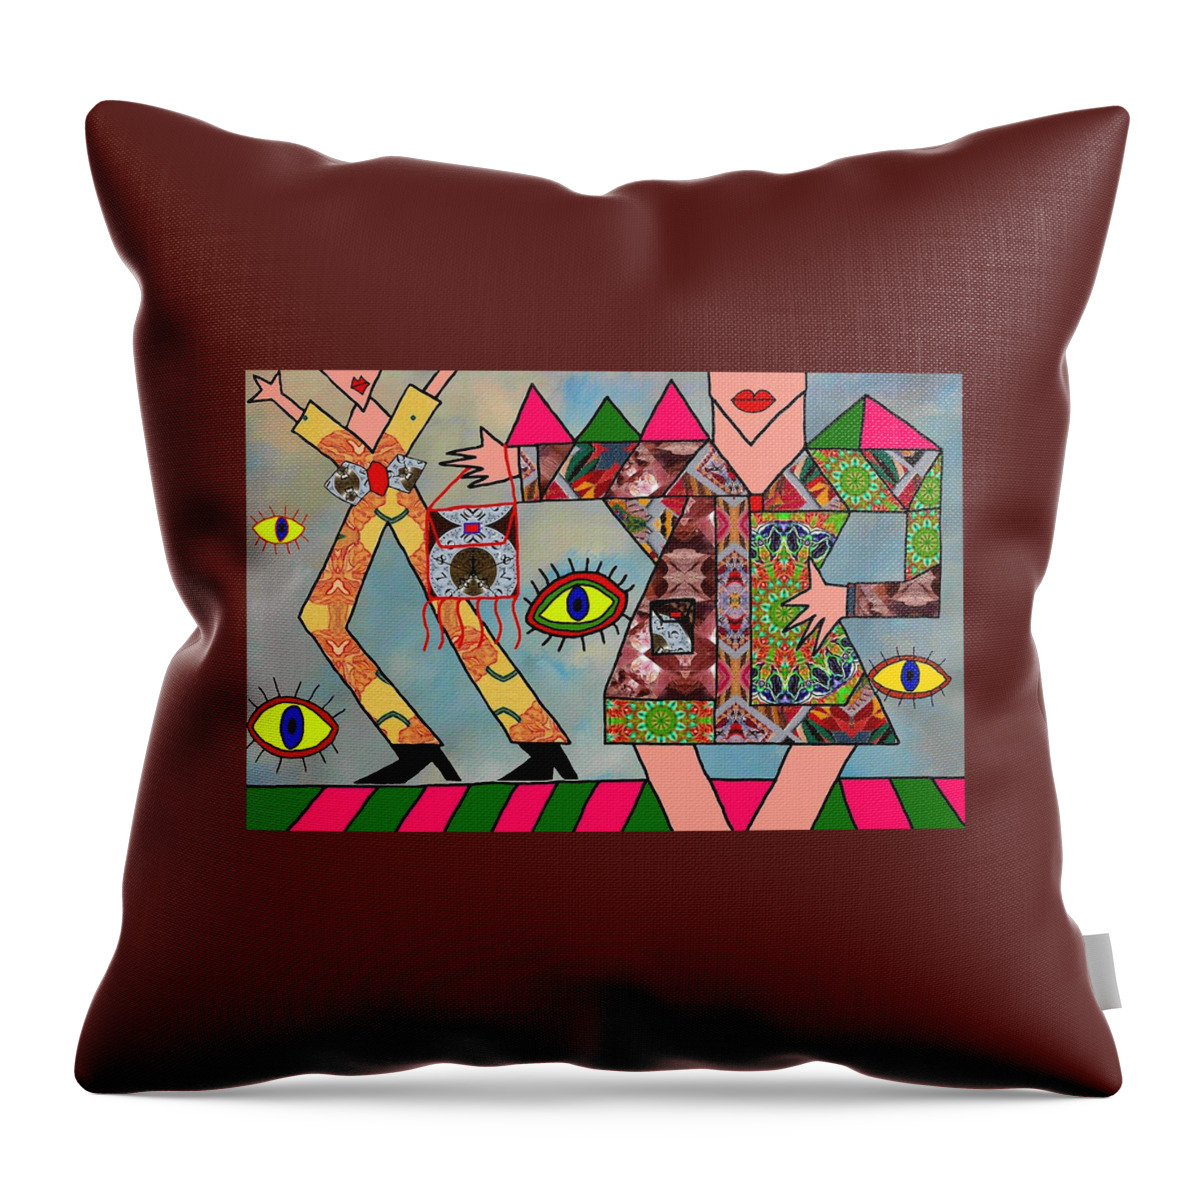 Fashion Throw Pillow featuring the digital art The New Purse by Laura Smith